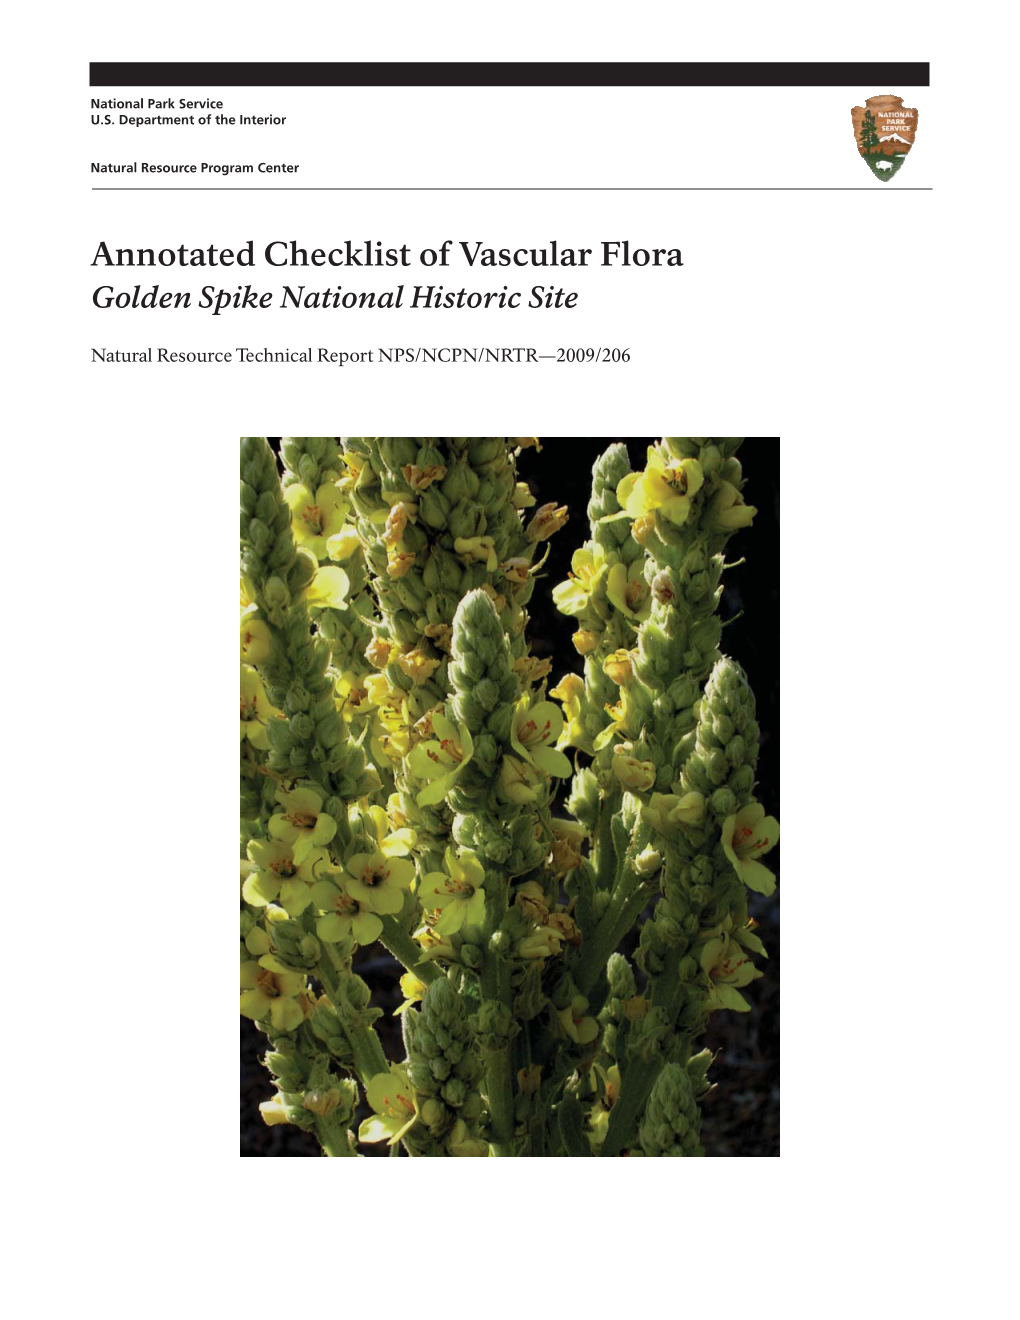 Annotated Checklist of Vascular Flora Golden Spike National Historic Site